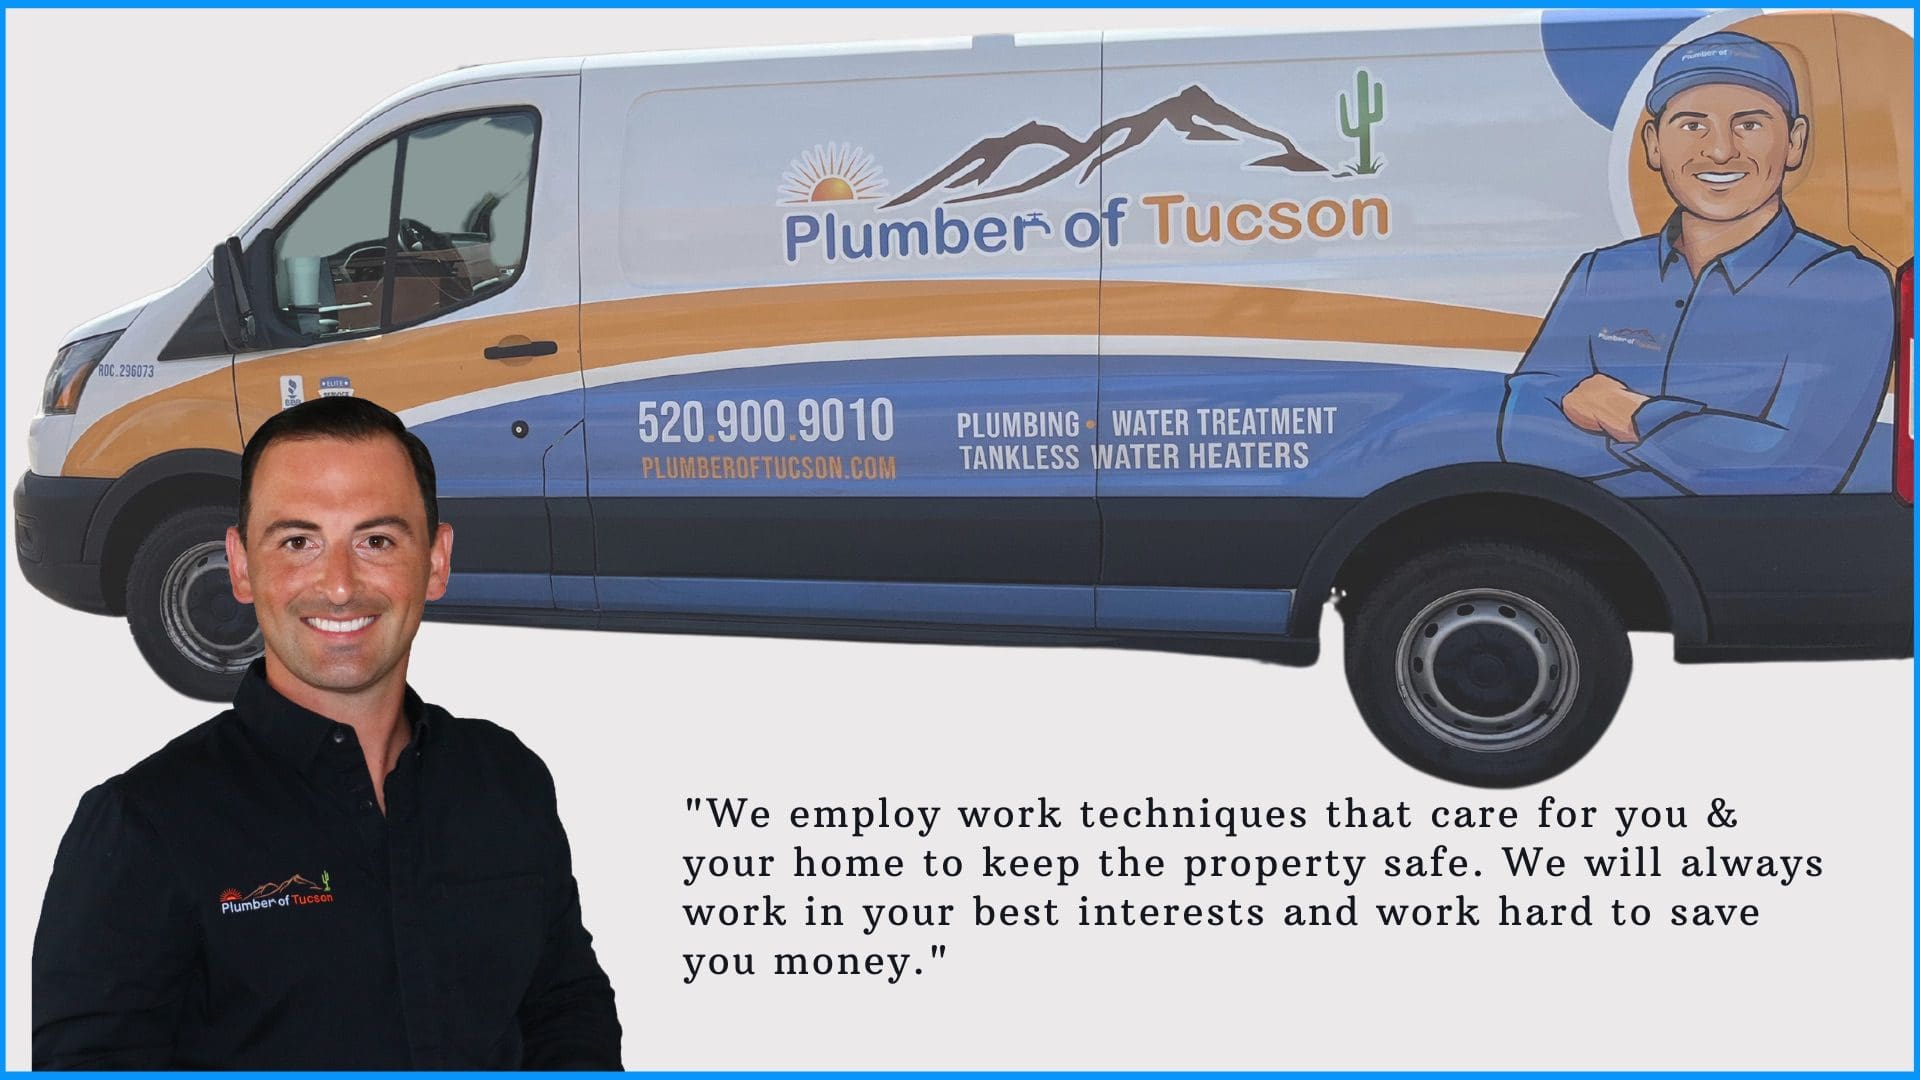 Plumber of Tucson service promise